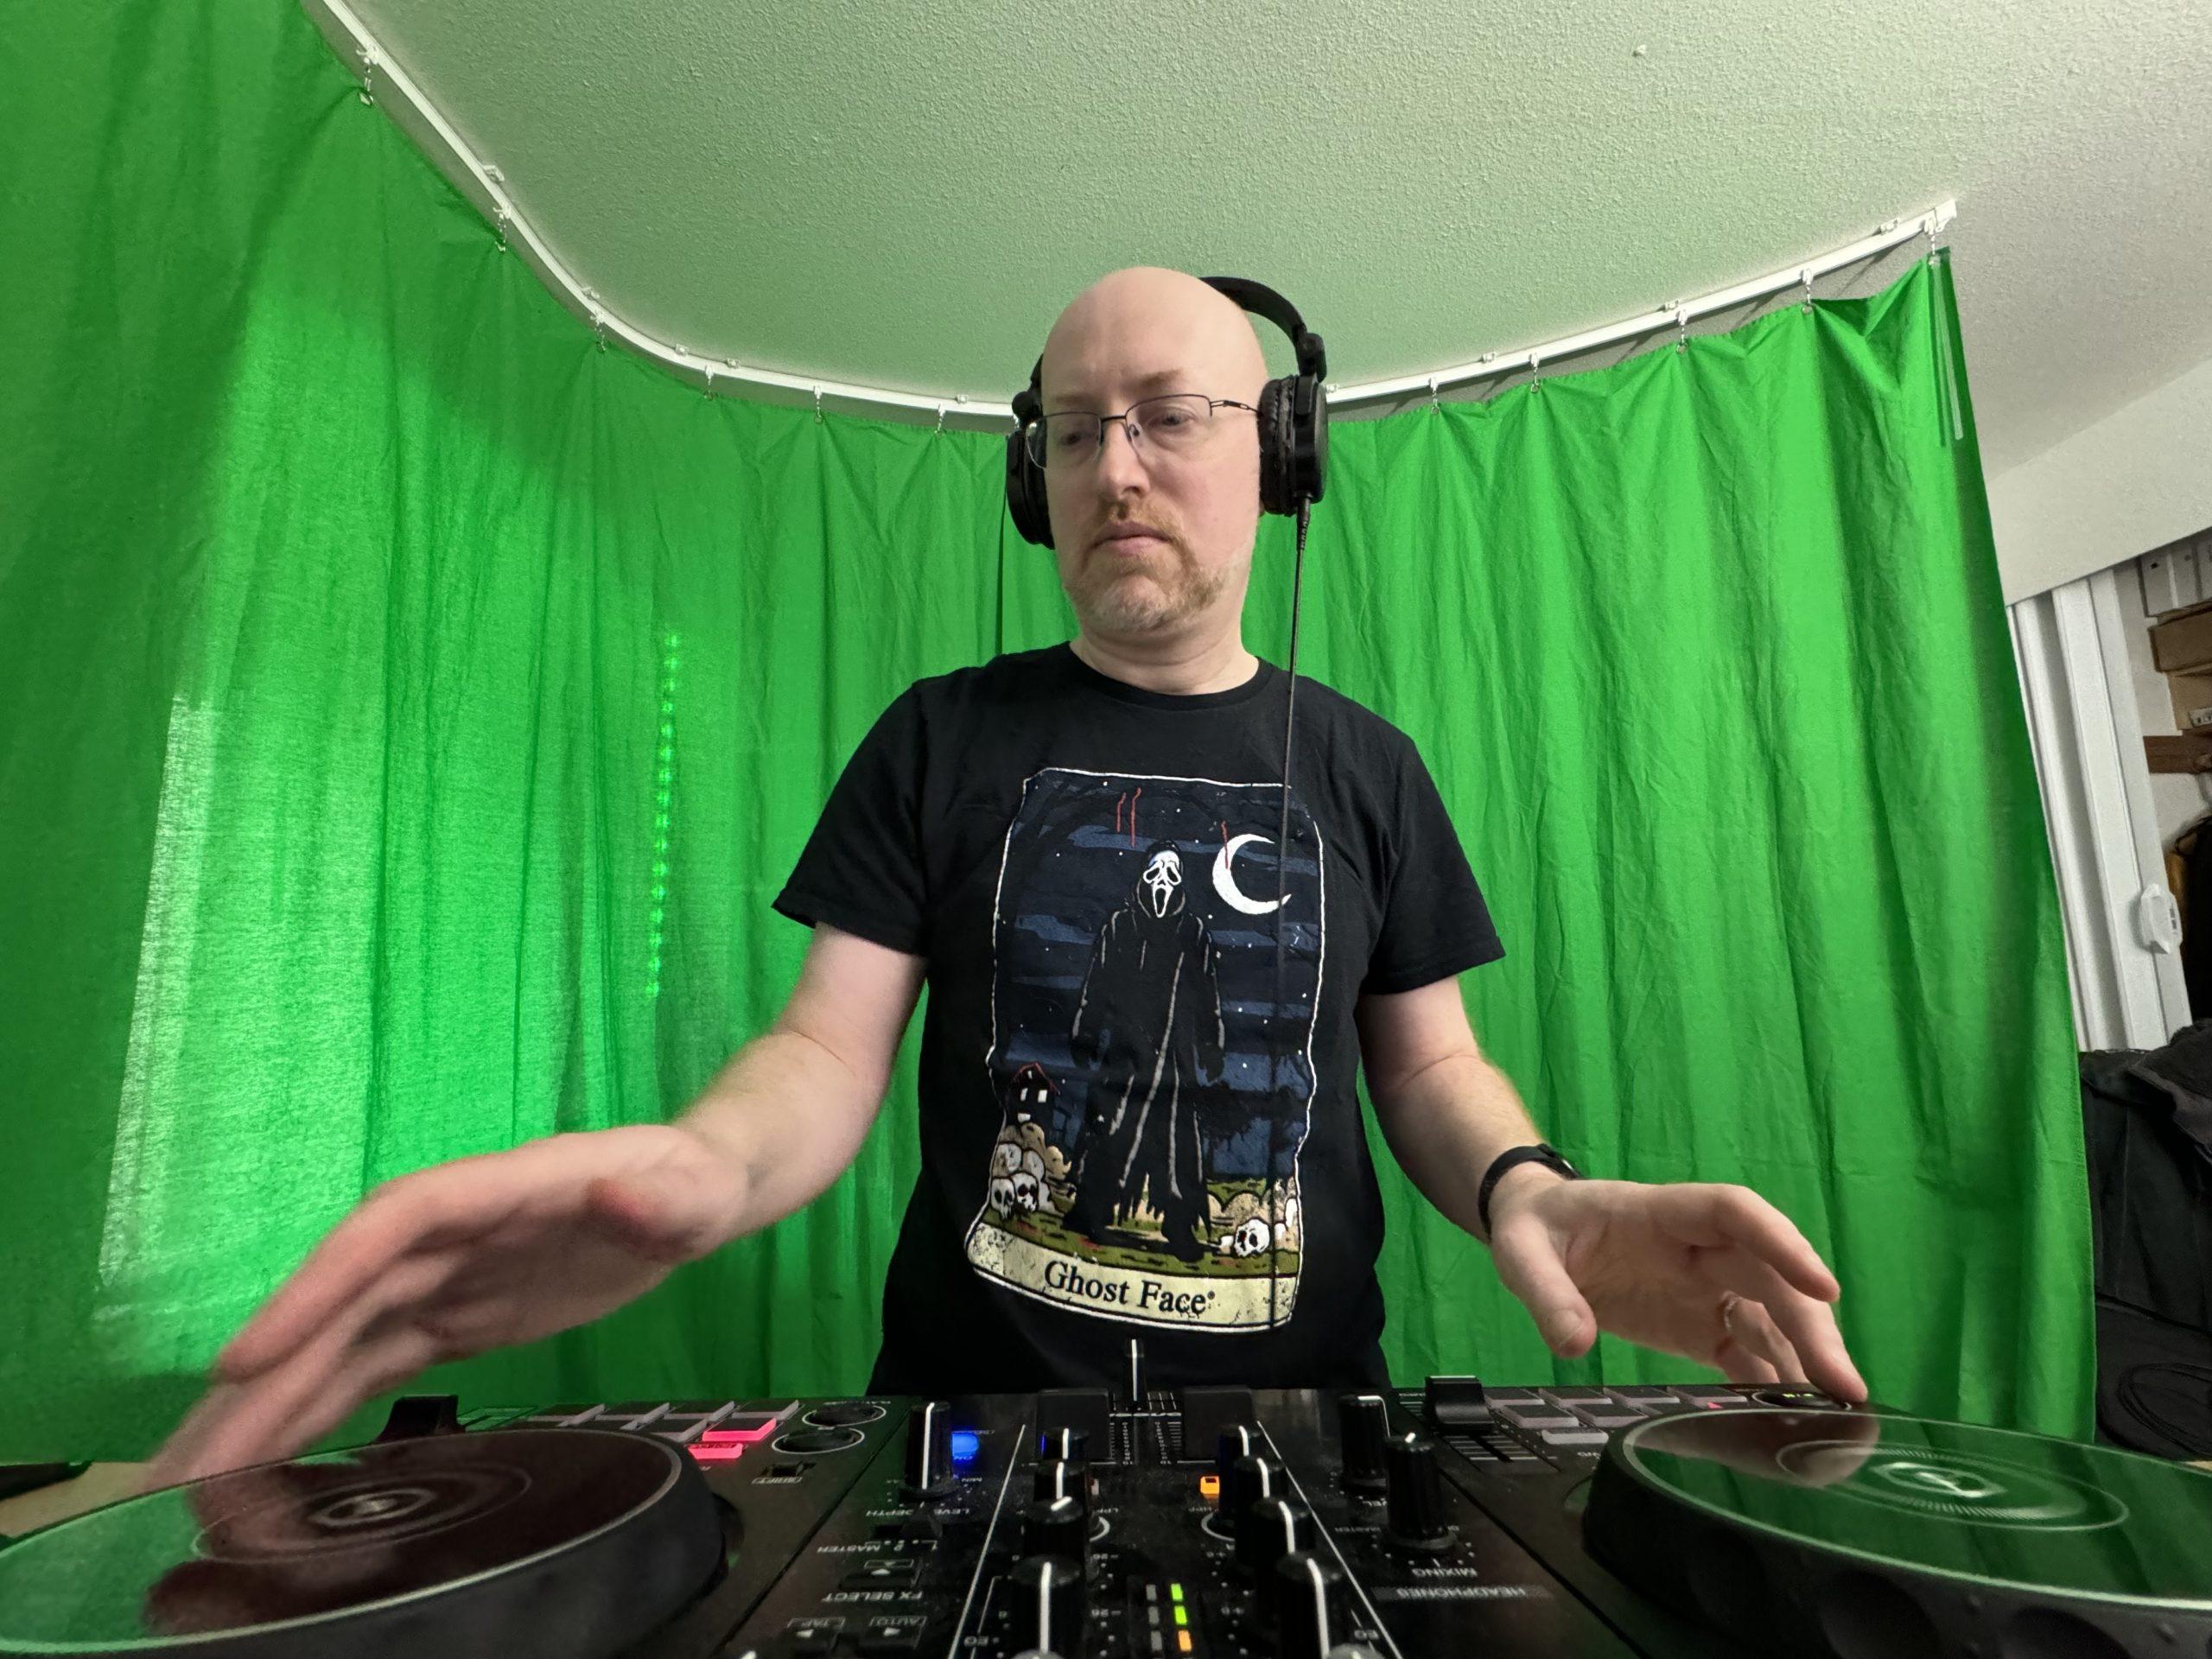 A wide-angle shot with a DJ mixer in the foreground, me wearing headphones and with my hands slightly blurry as I spin one of the mixer controllers, and a greenscreen hanging from a ceiling-mounted track behind me.